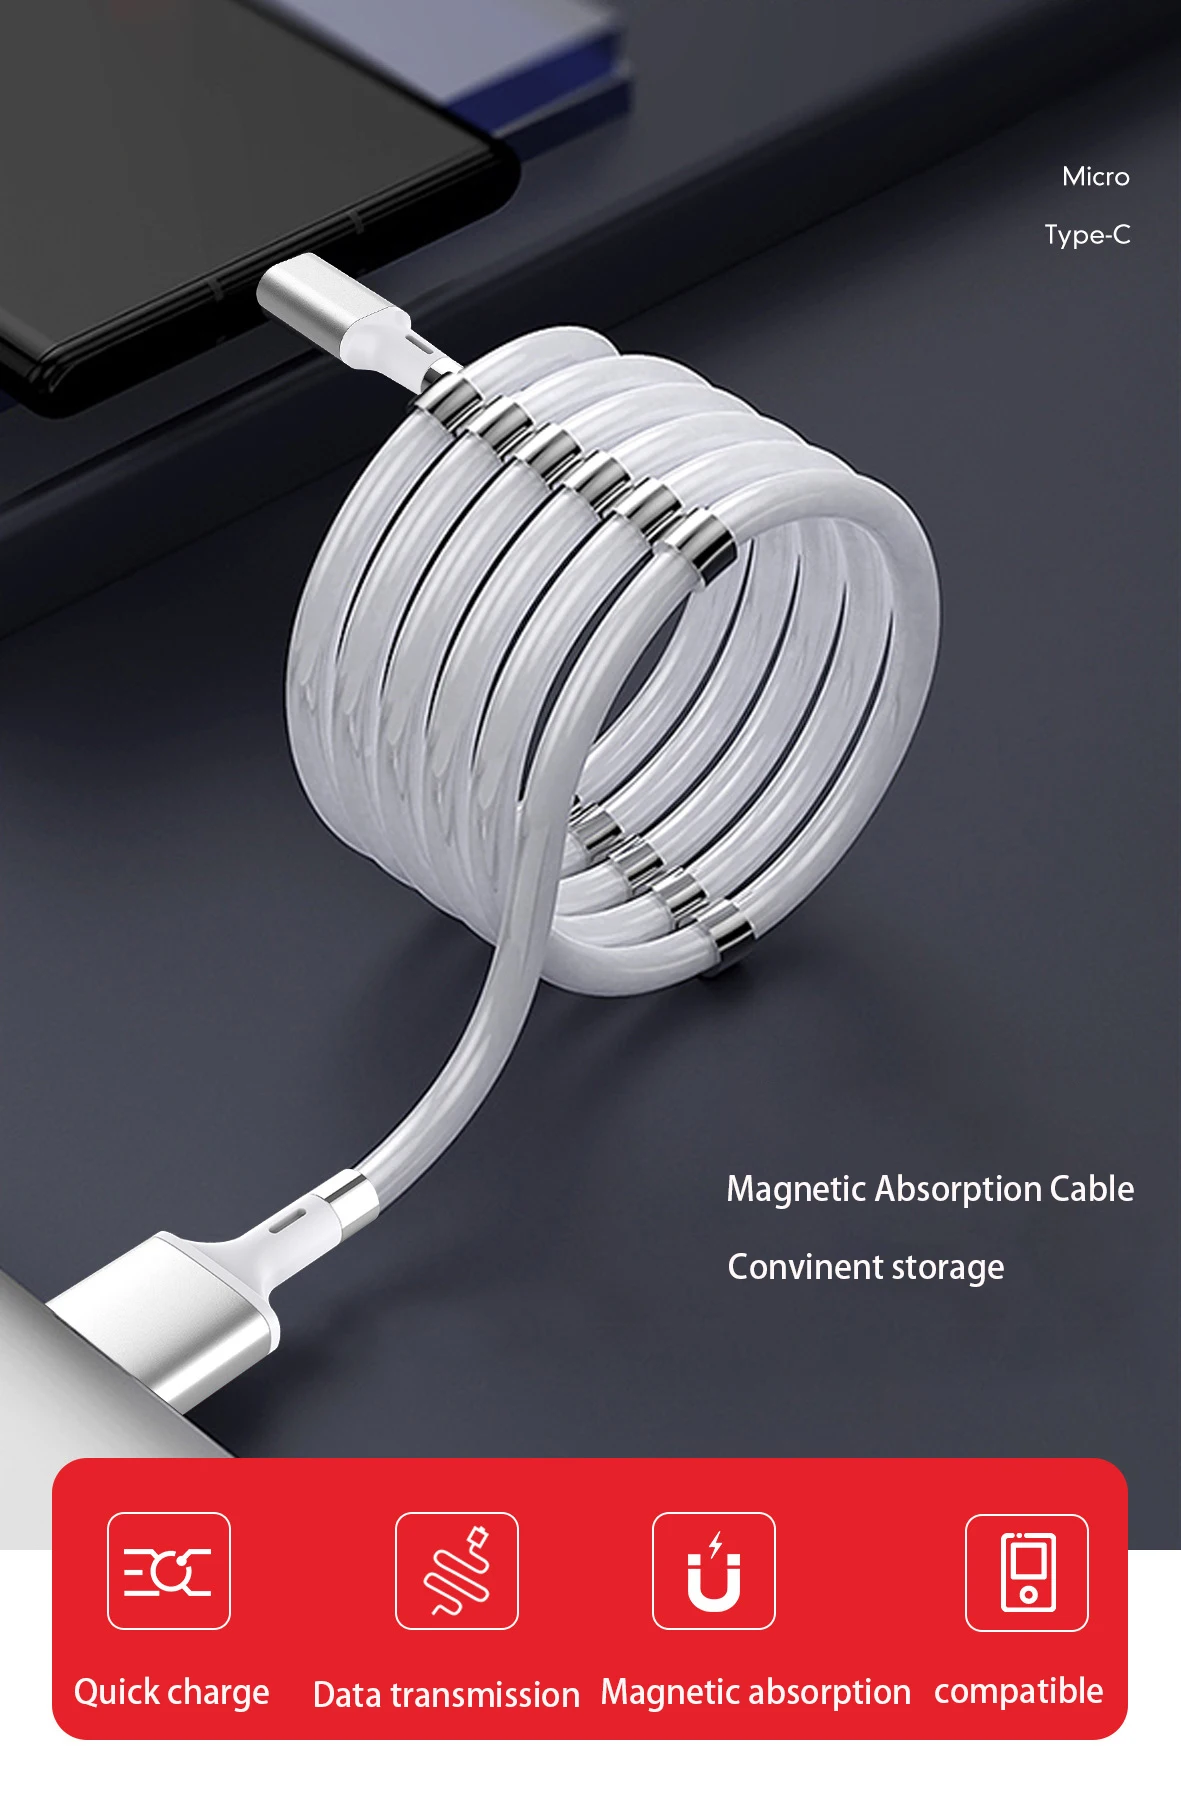 2021 hot sale Data Cable Magnetic Absorption Cable & Convenient Storage cable For Mobile Phone